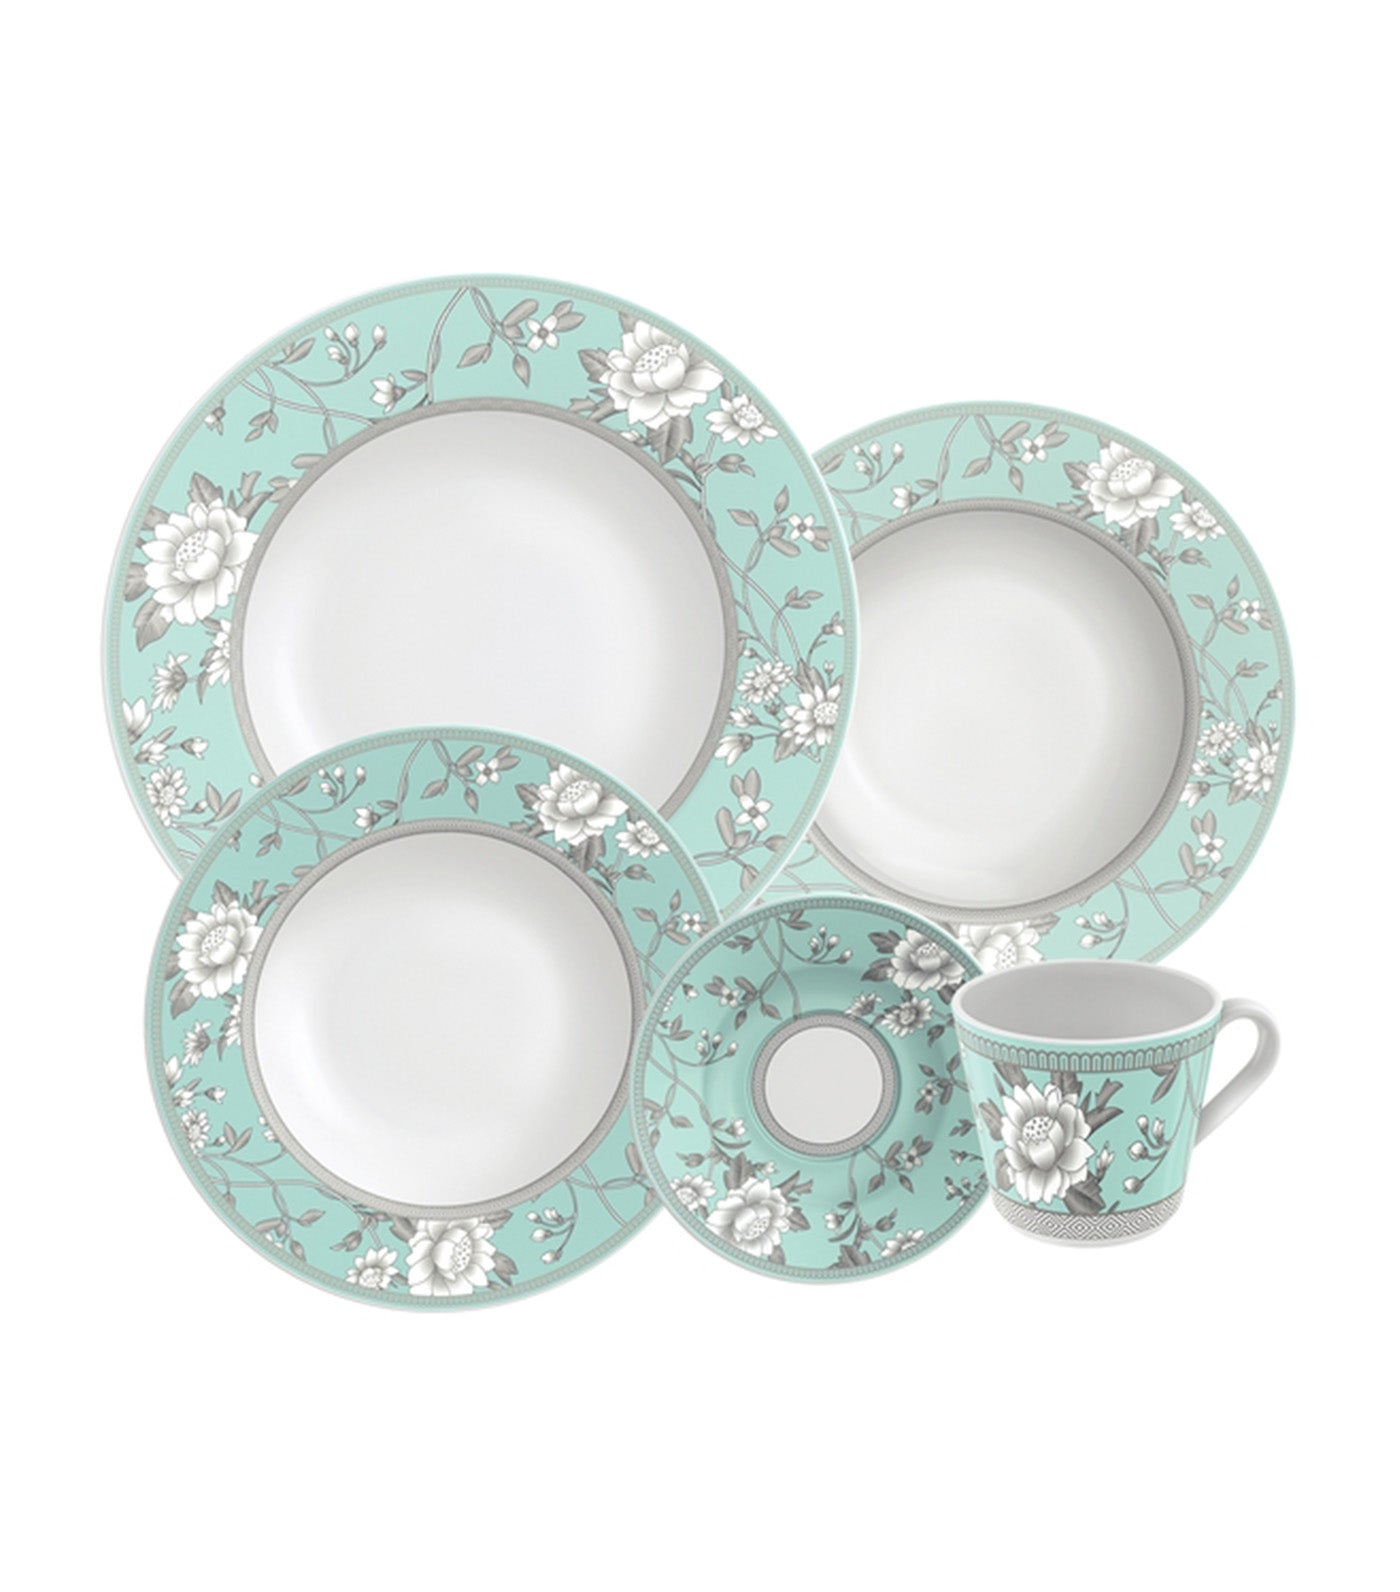 Tramontina Helen Decorated Porcelain Collection